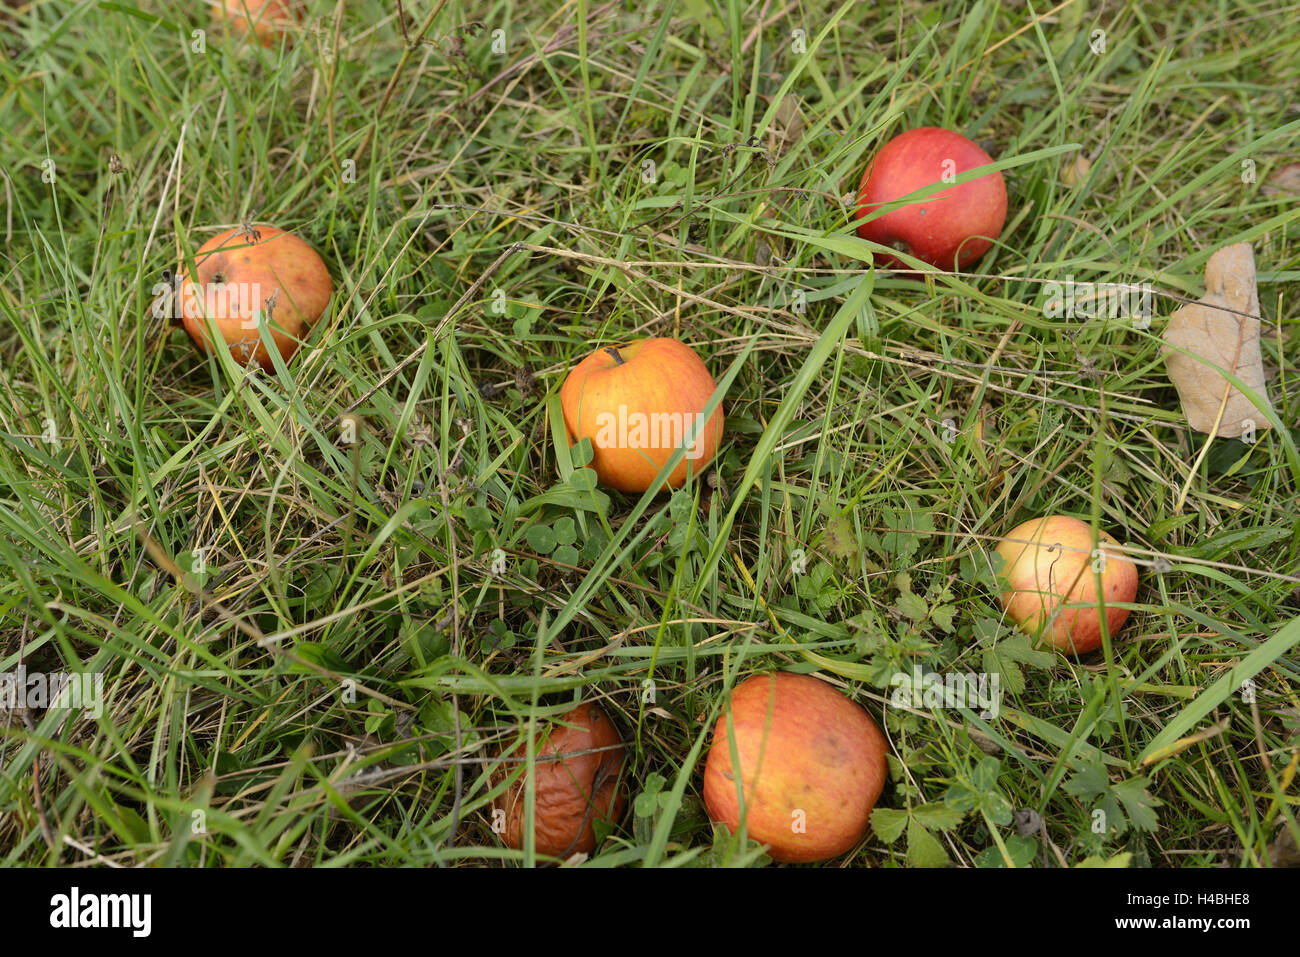 Windfall, cultural apples, Malus domestica, Pyrus malus, meadow, lie, ripe, Stock Photo